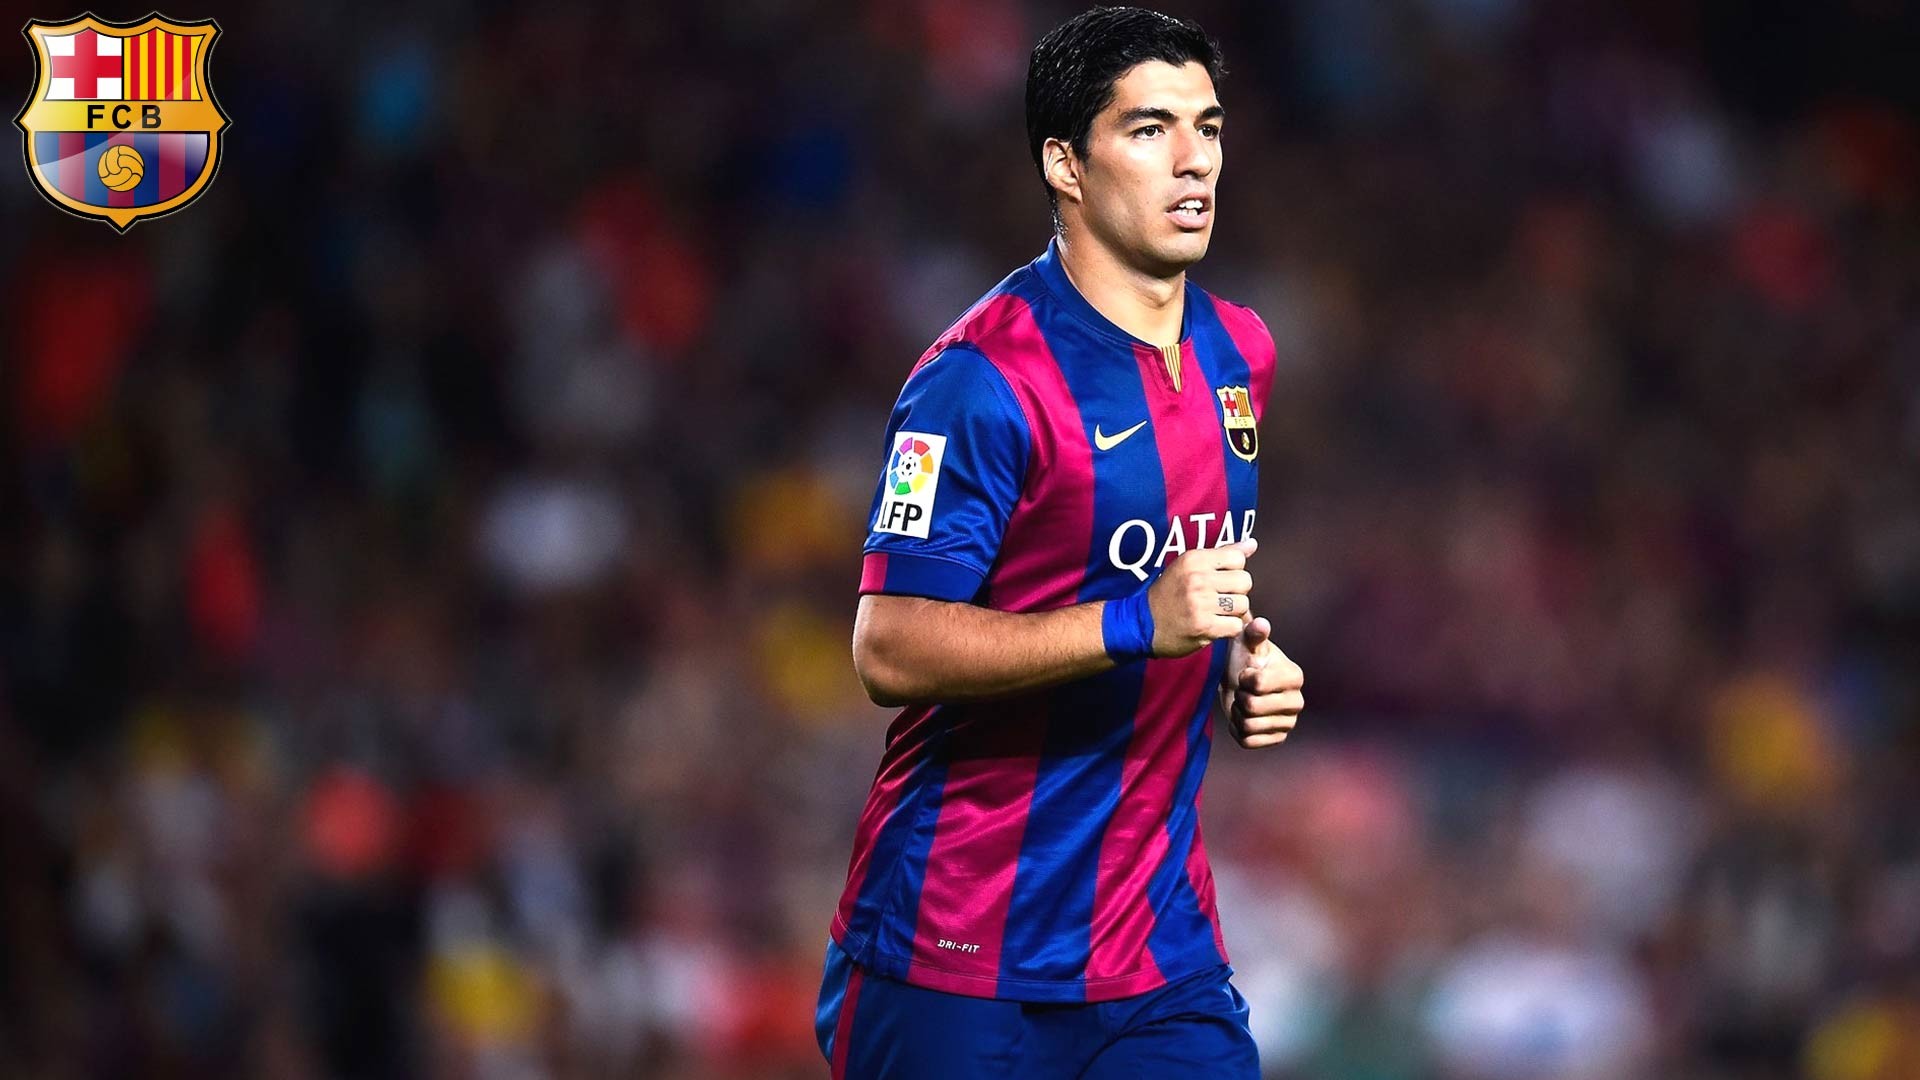 1920x1080 Luis Suarez, FC Barcelona - Full HD Wallpaper. ImgPrix.com - High  Definition Wallpapers and Covers | Sports HD Wallpapers | Pinterest | FC  Barcelona, ...